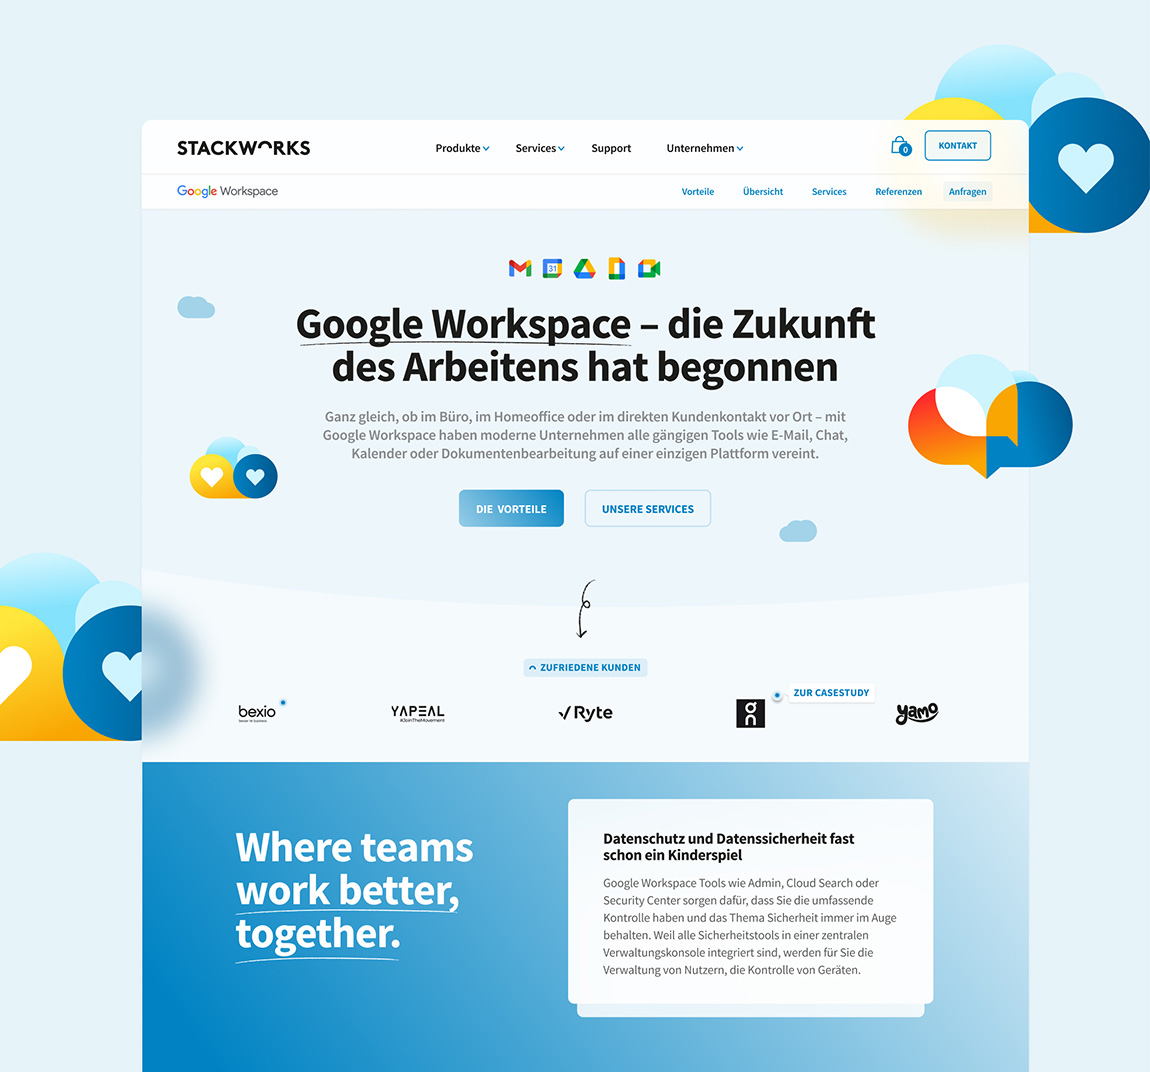 Halbstark GmbH: THE PERFECT SYMBIOSIS OF USER EXPERIENCE AND GREAT WEB DESIGN